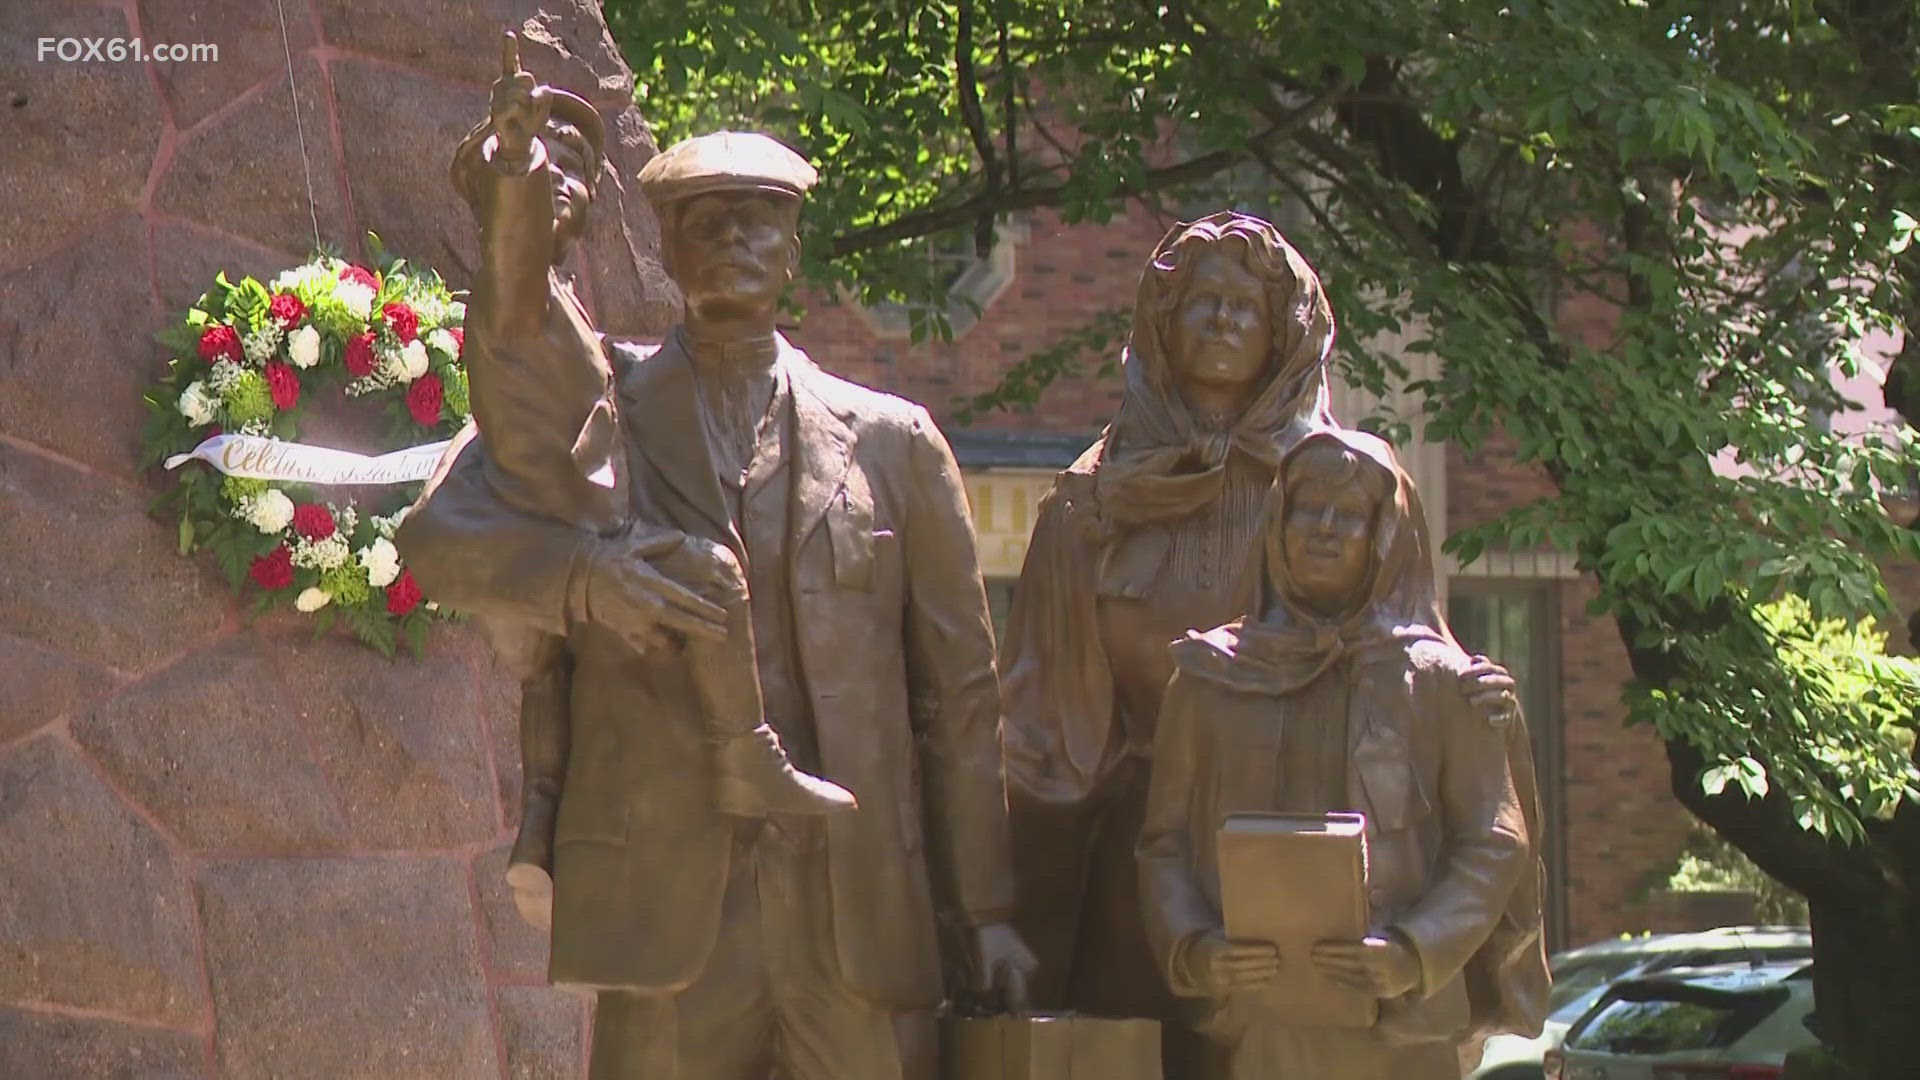 The monument located in Wooster Square Park depicts a young immigrant family arriving in America.